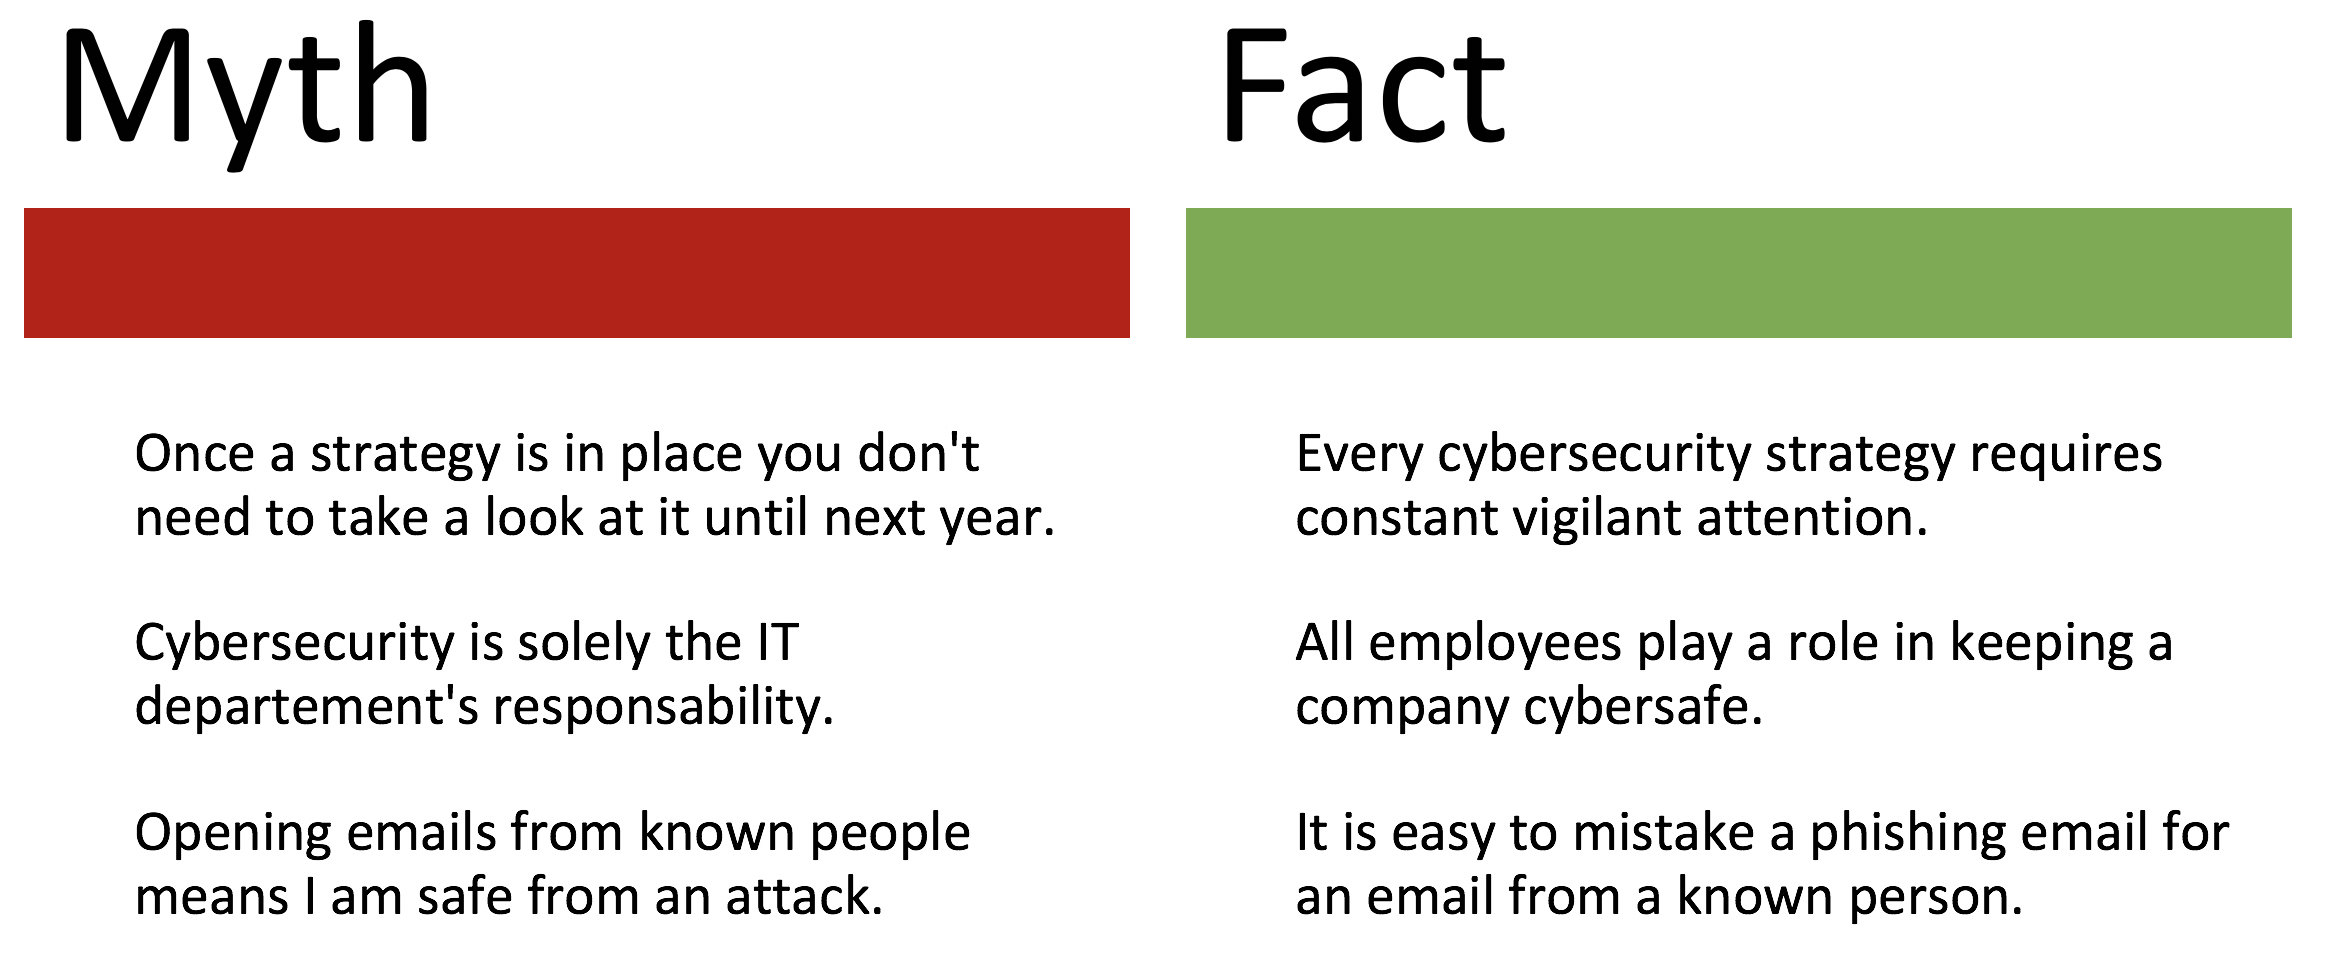 TOP CYBERSECURITY MYTHS DEBUNKED